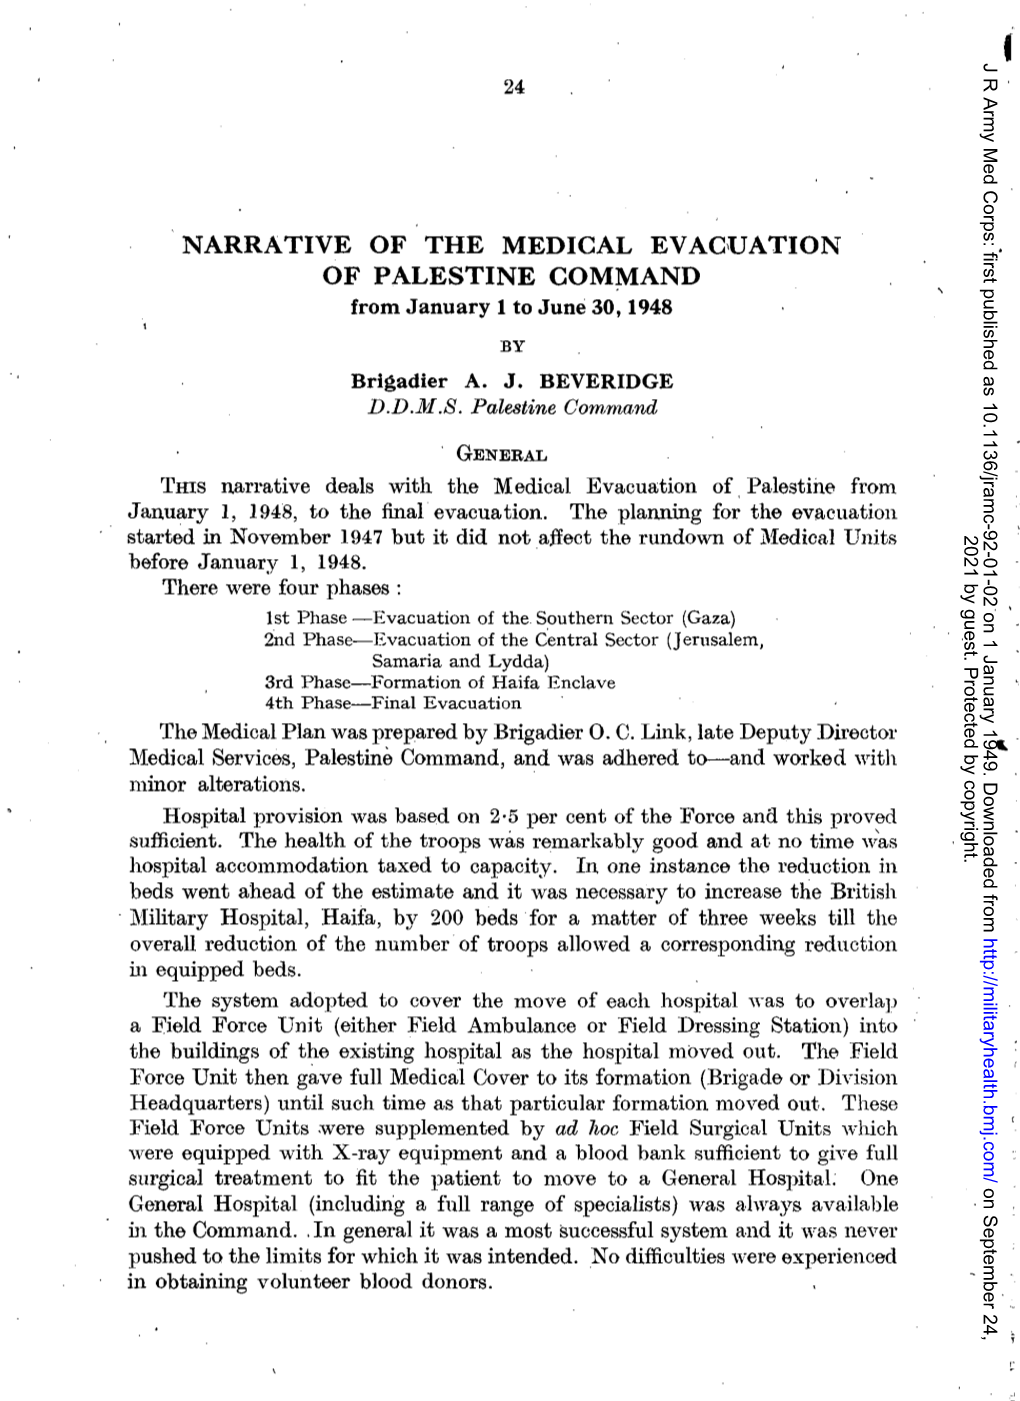 NARRATIVE of the MEDICAL EVACUATION of PALESTINE COMMAND from January 1 to June 30,1948